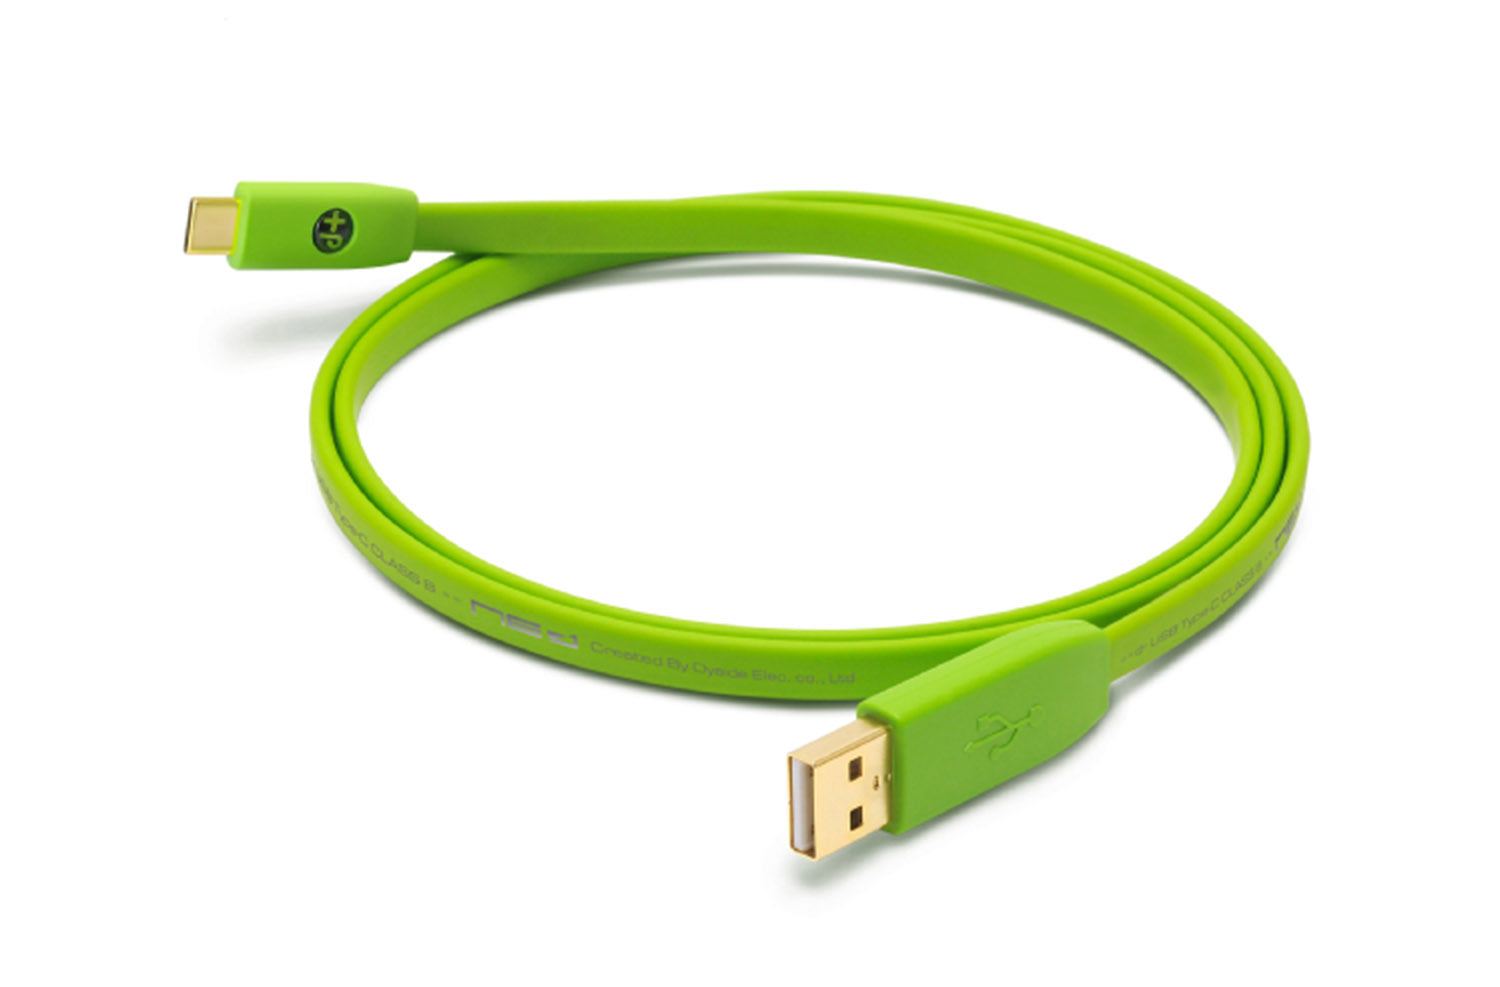 Oyaide Neo d+ USB 2.0 Type-A to Type-C Class B Cable 2M - Hollywood DJ